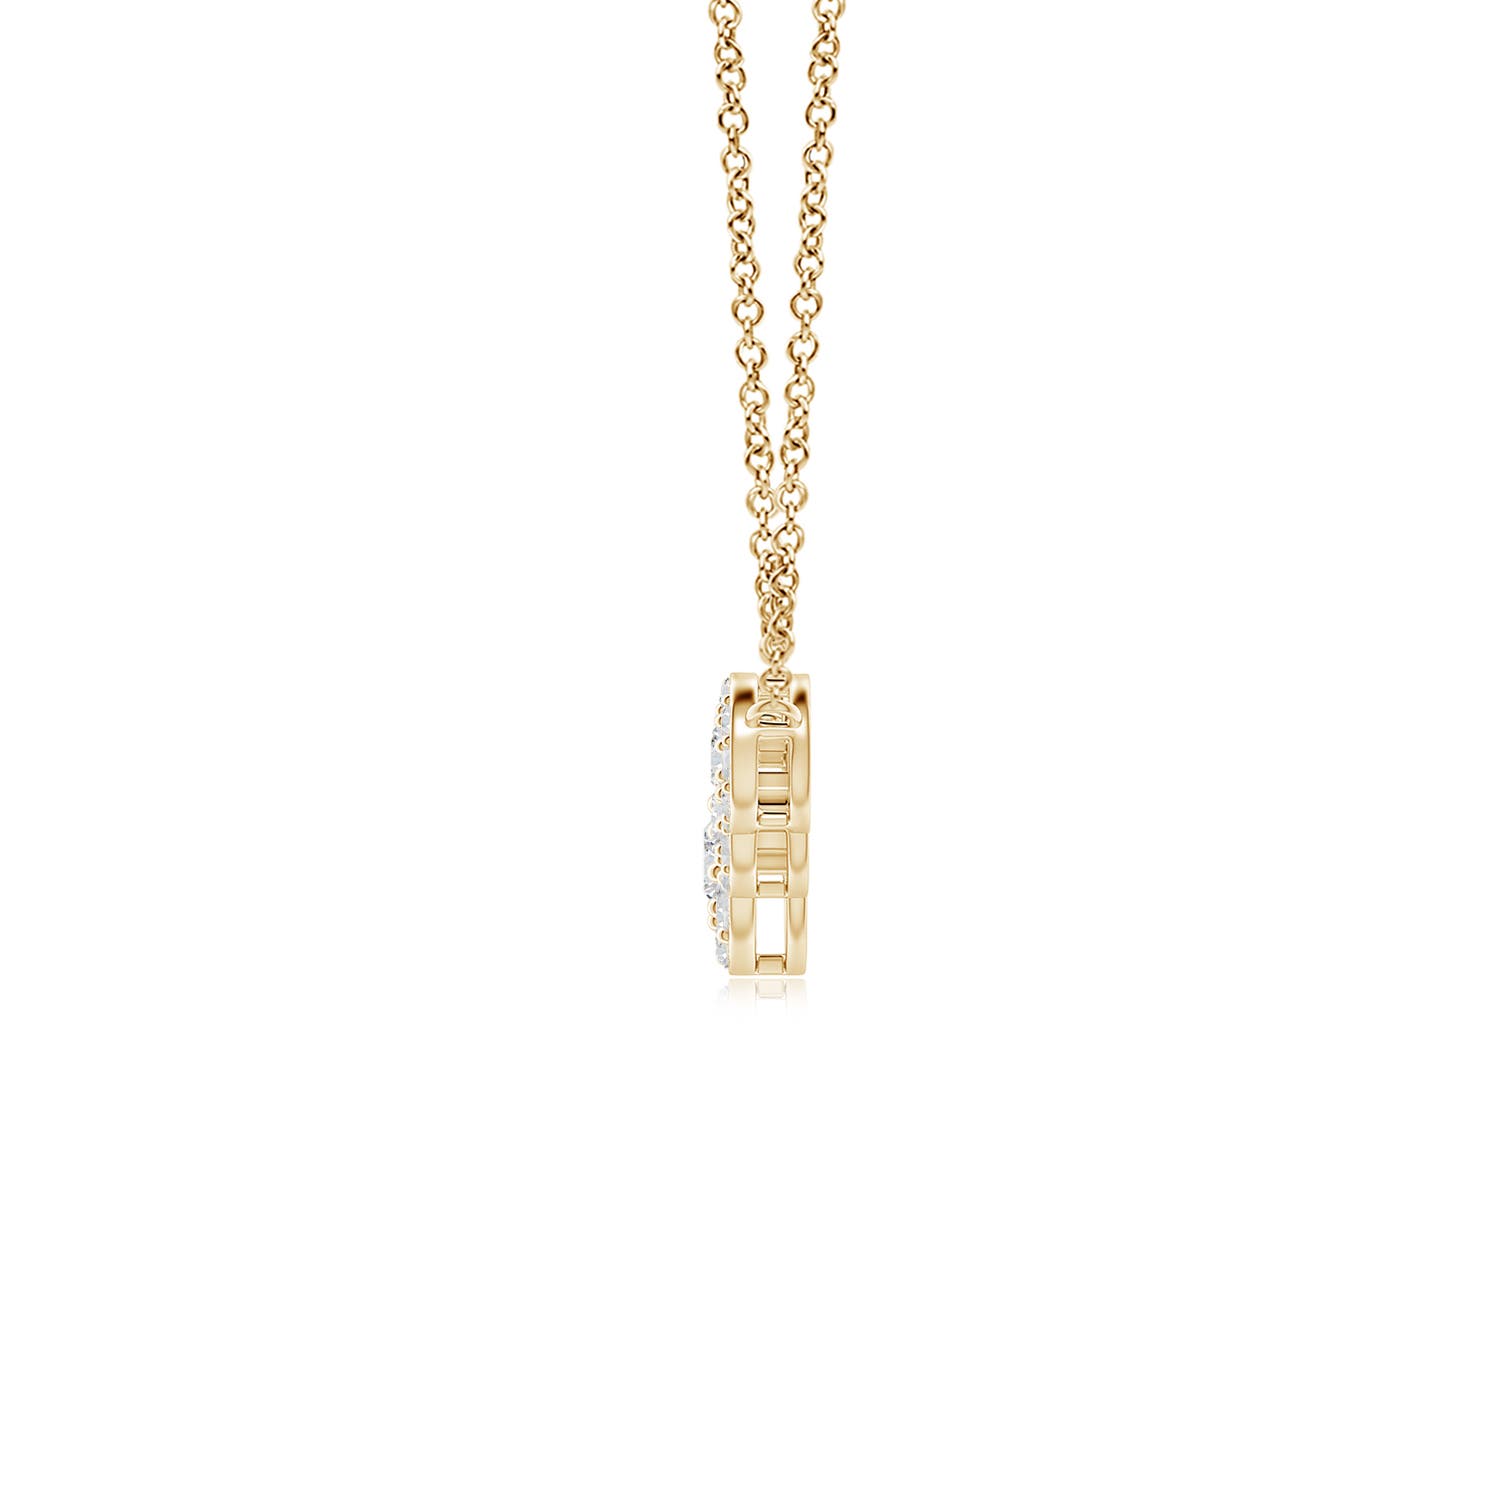 H, SI2 / 1.48 CT / 14 KT Yellow Gold